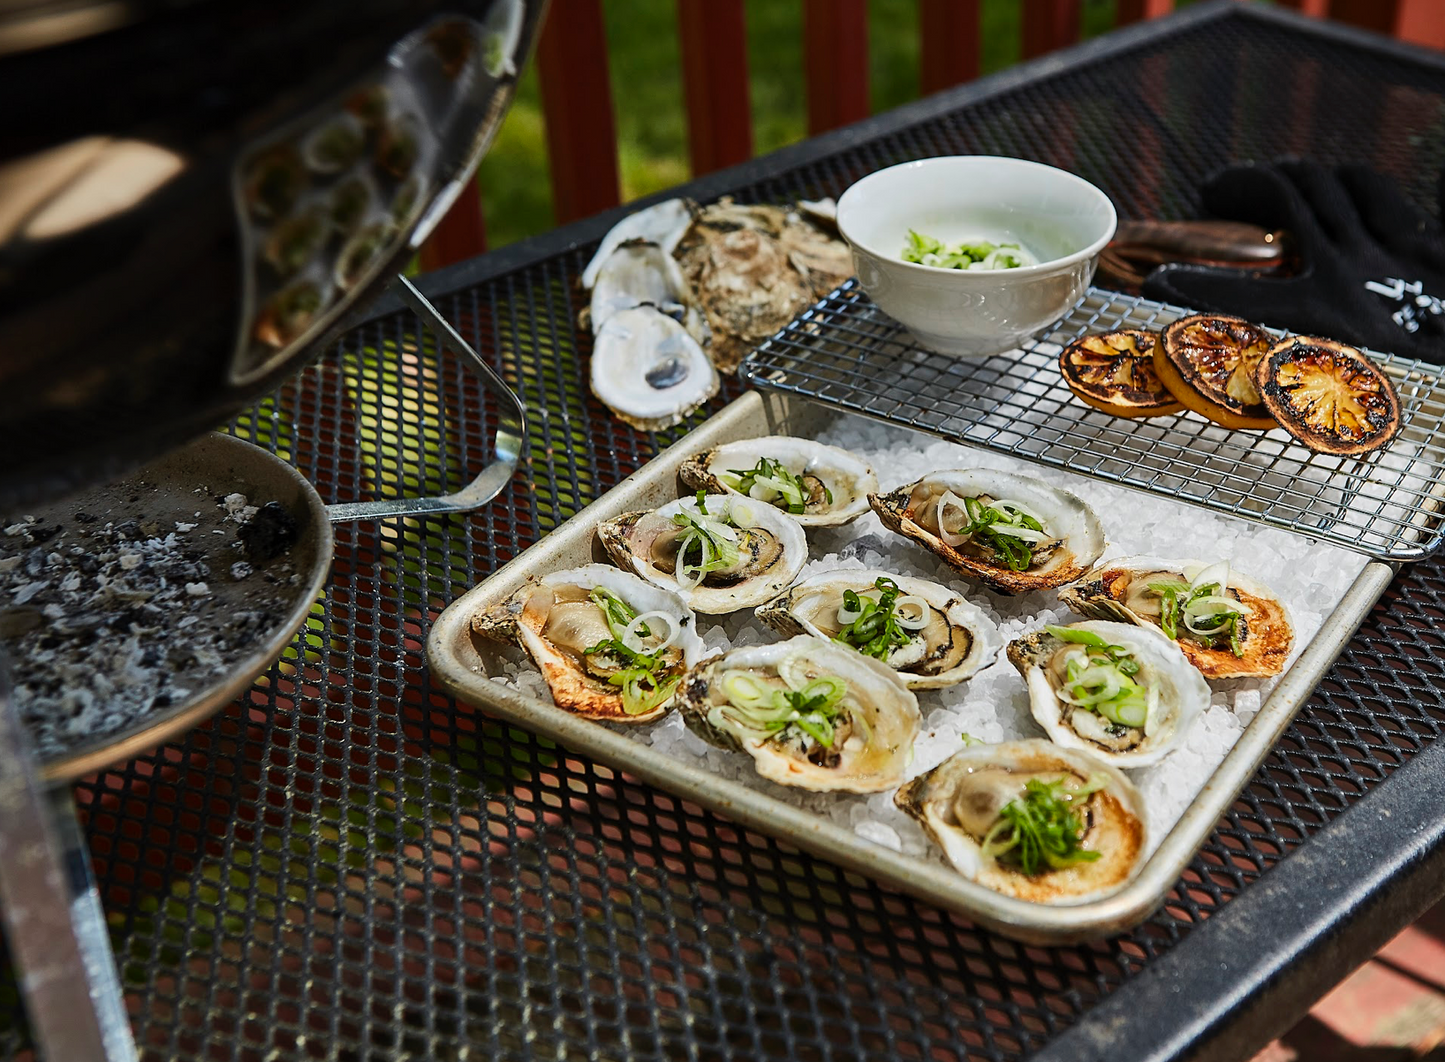 Check out these tips and tricks on how to grill your white stone oysters to perfection